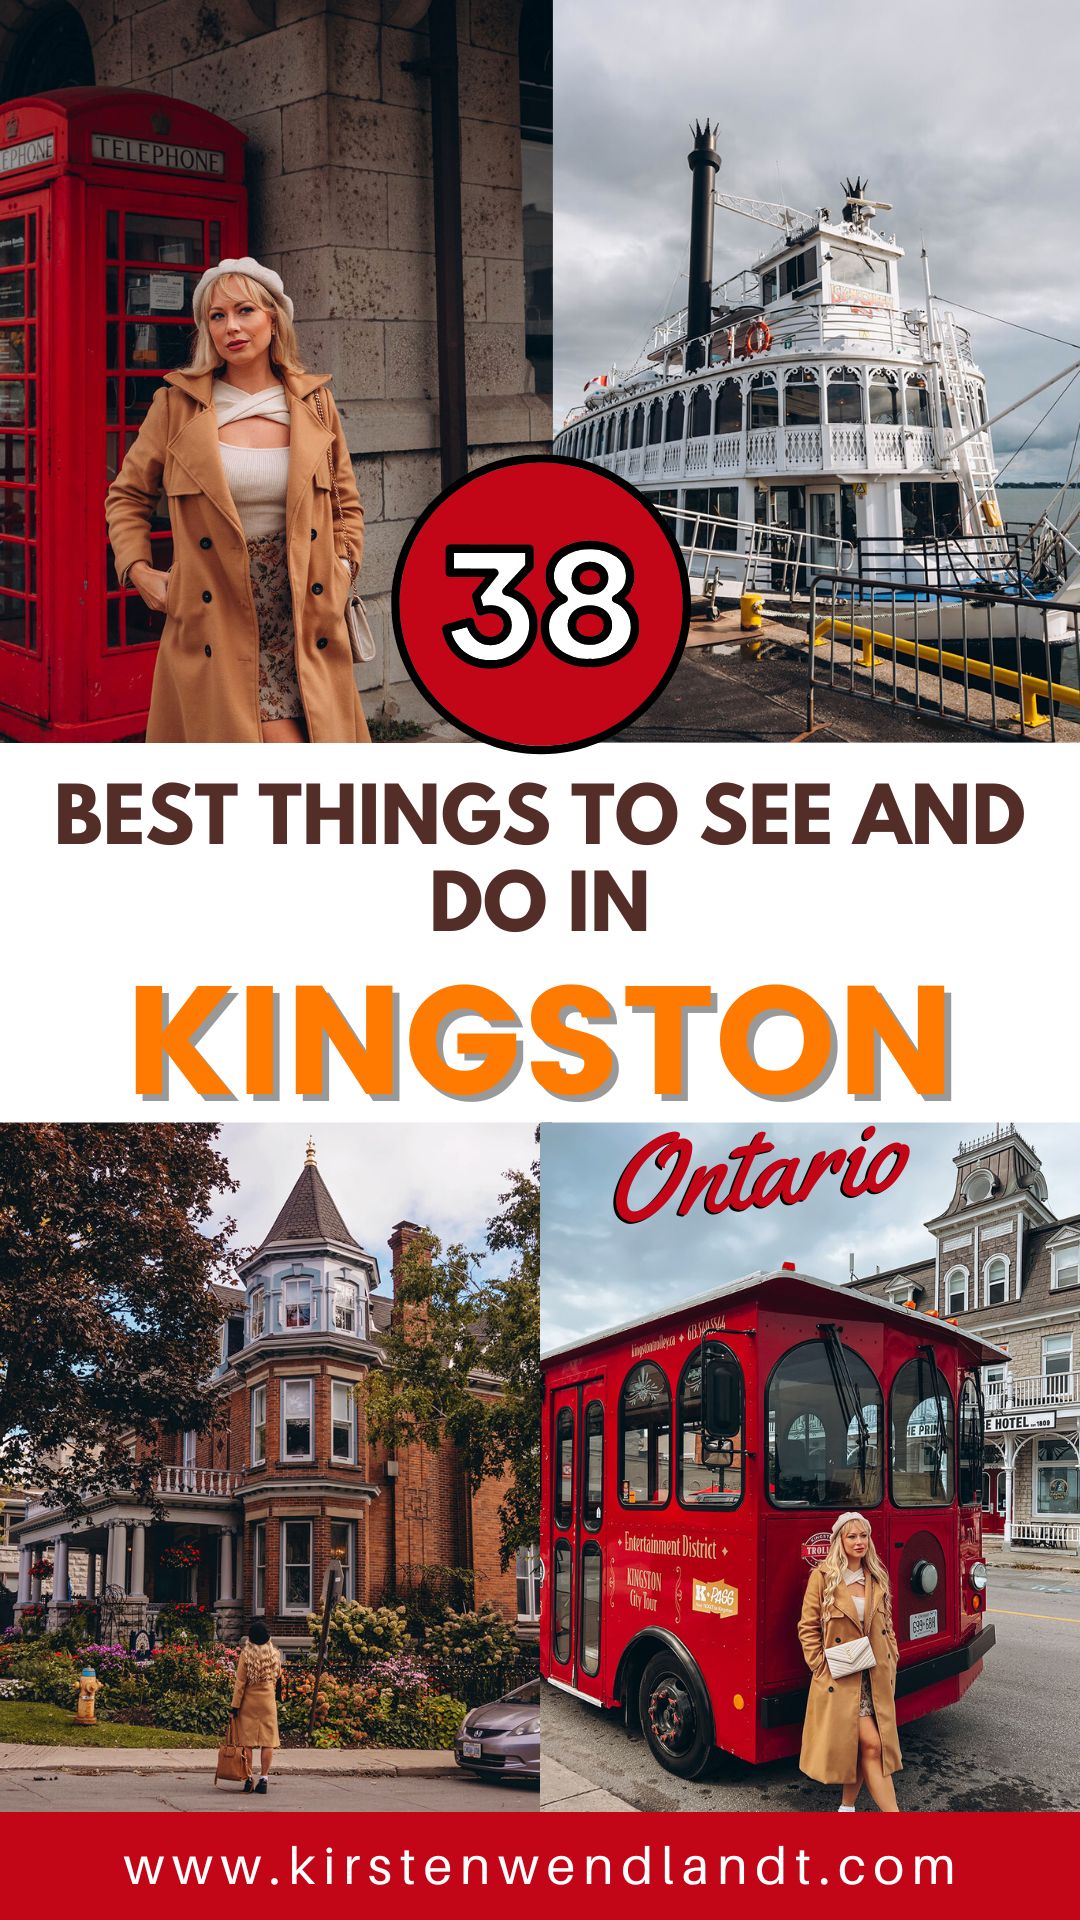 Planning a trip to Kingston, Ontario soon? This guide to the best things to do in Kingston is for you! From the top Kingston activities and attractions, to the must see sights, best restaurants, bars, and everything in between. You won’t want to miss this guide that will help you plan your perfect Kingston getaway.